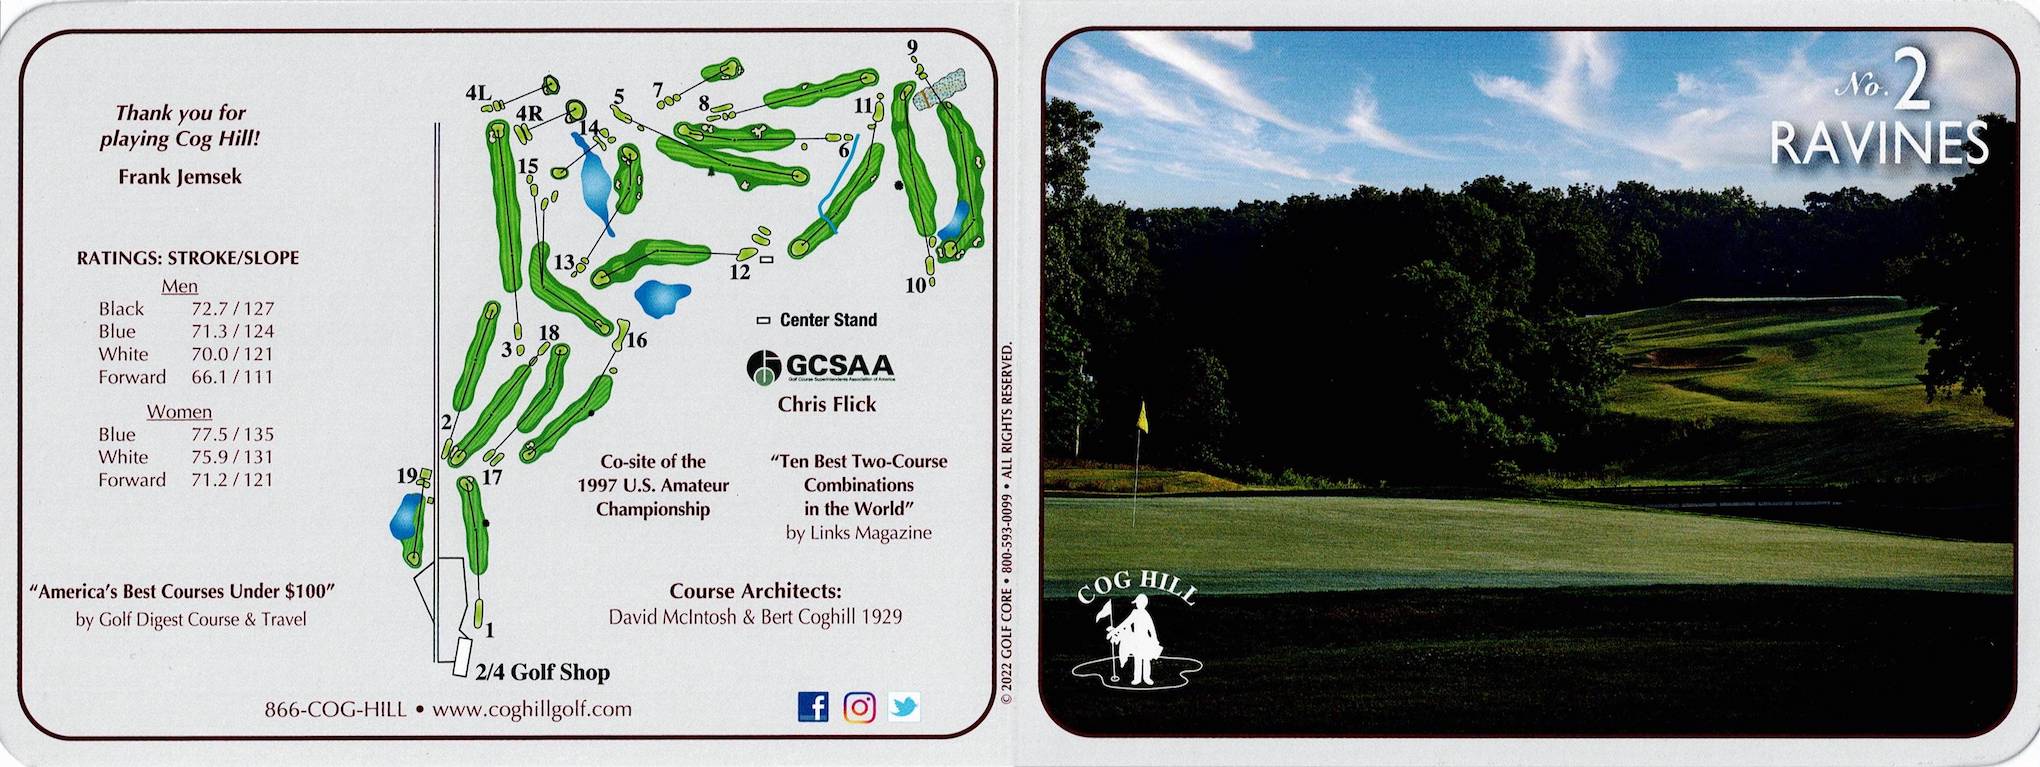 Scan of the scorecard from Cog Hill Course #2 - Ravines in Palos Park, Illinois. 